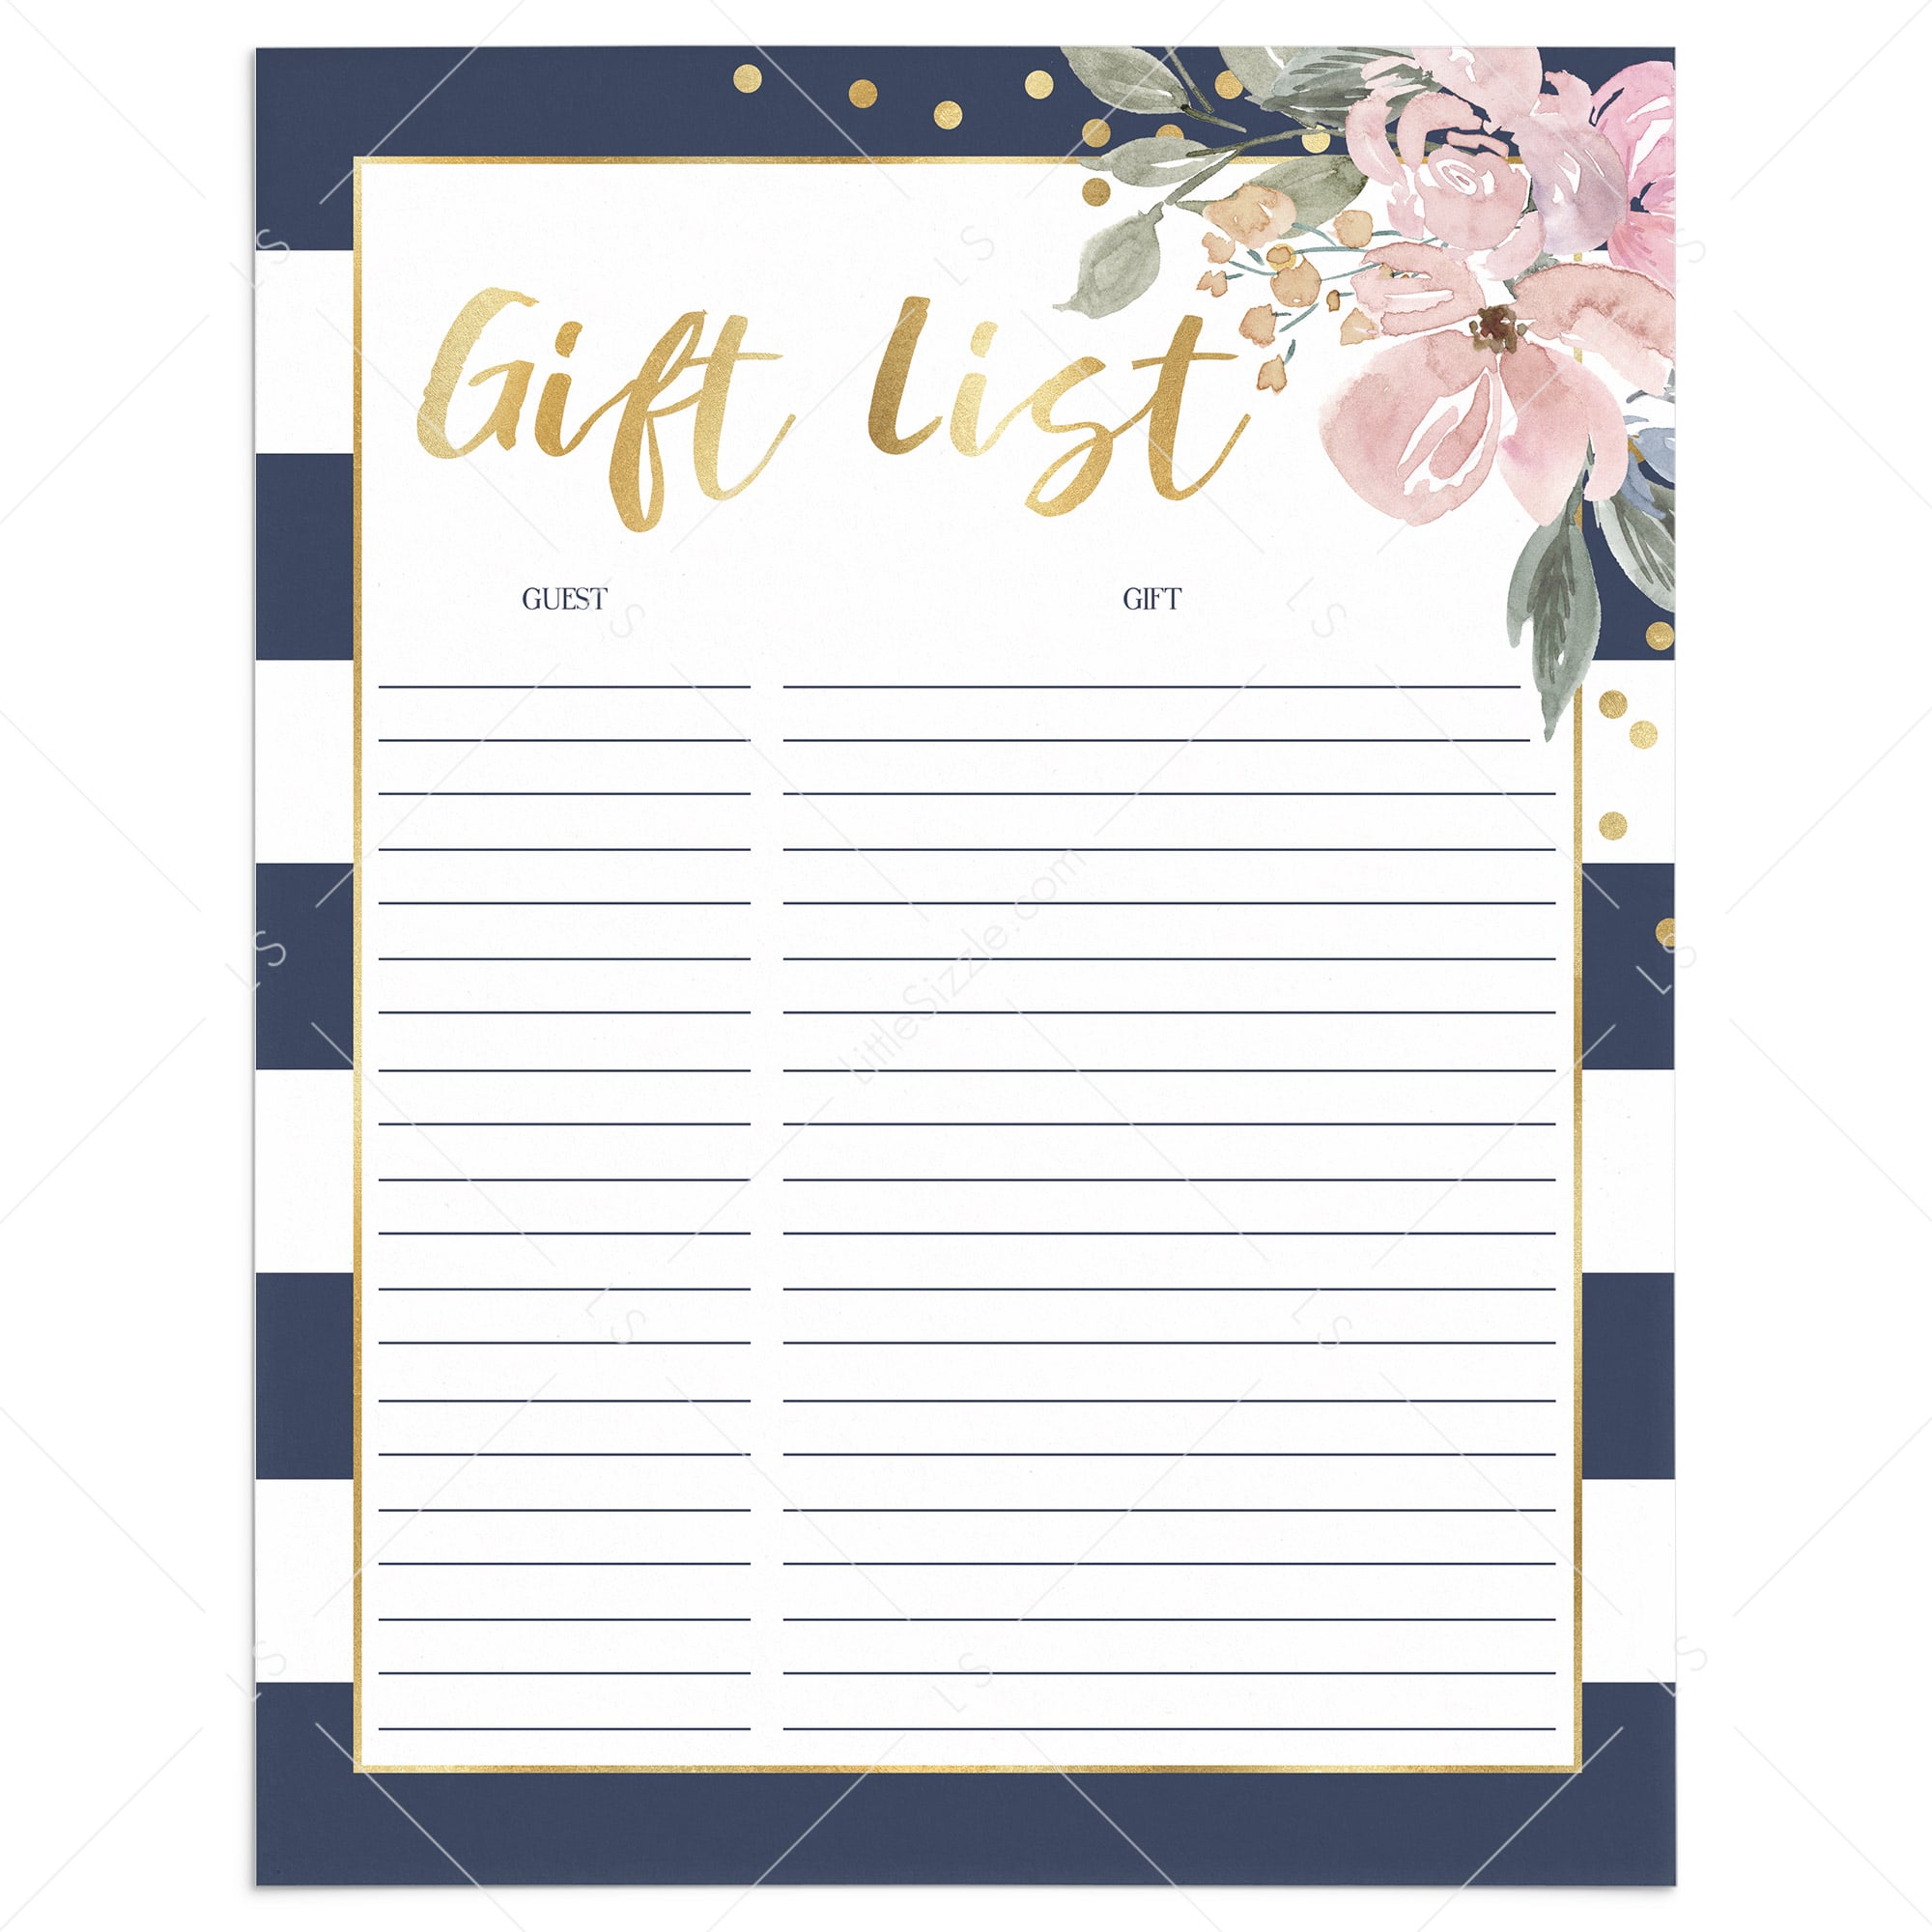 Printable navy and pink gift list by LittleSizzle